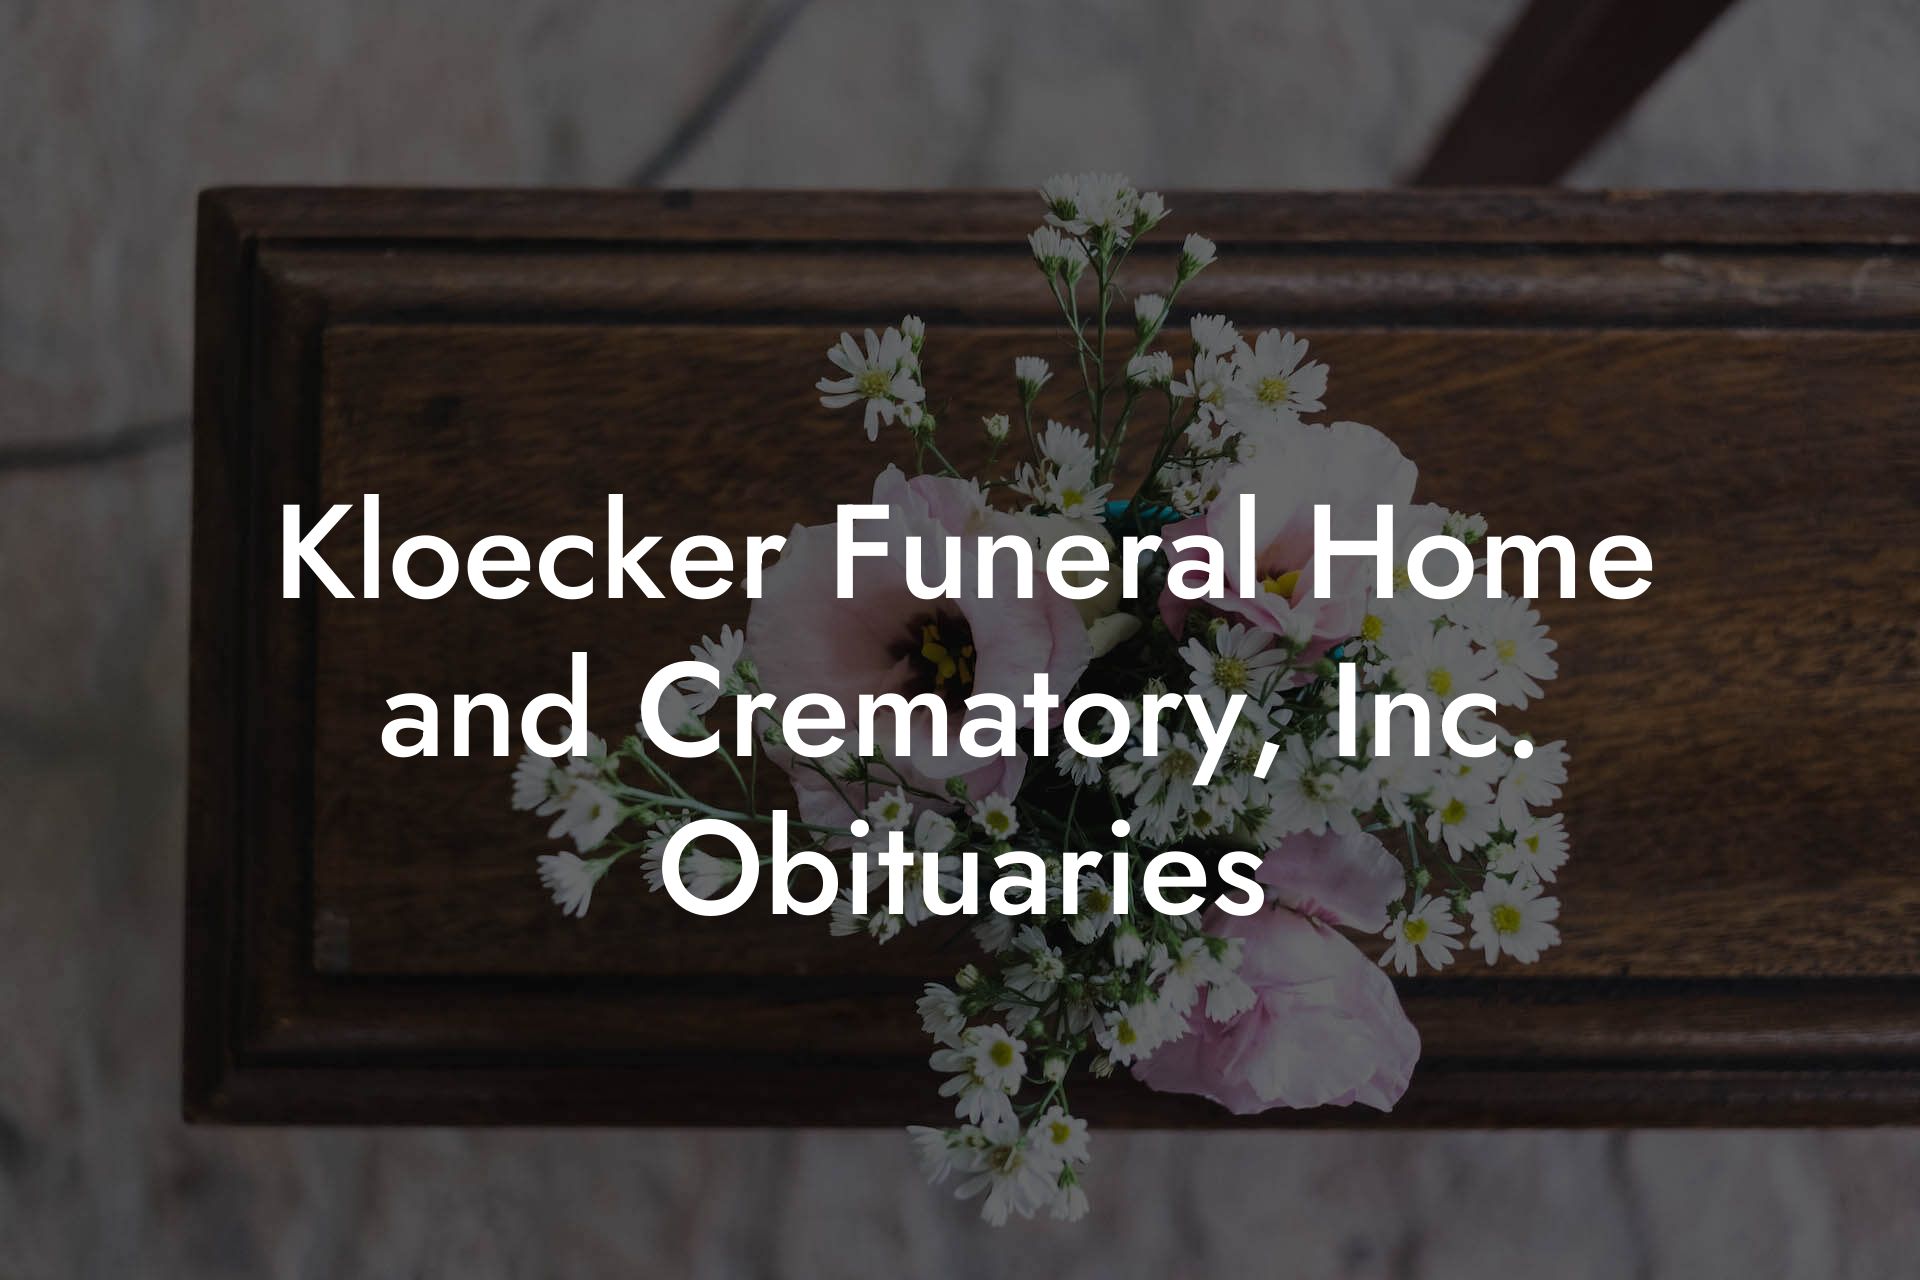 Kloecker Funeral Home and Crematory, Inc. Obituaries